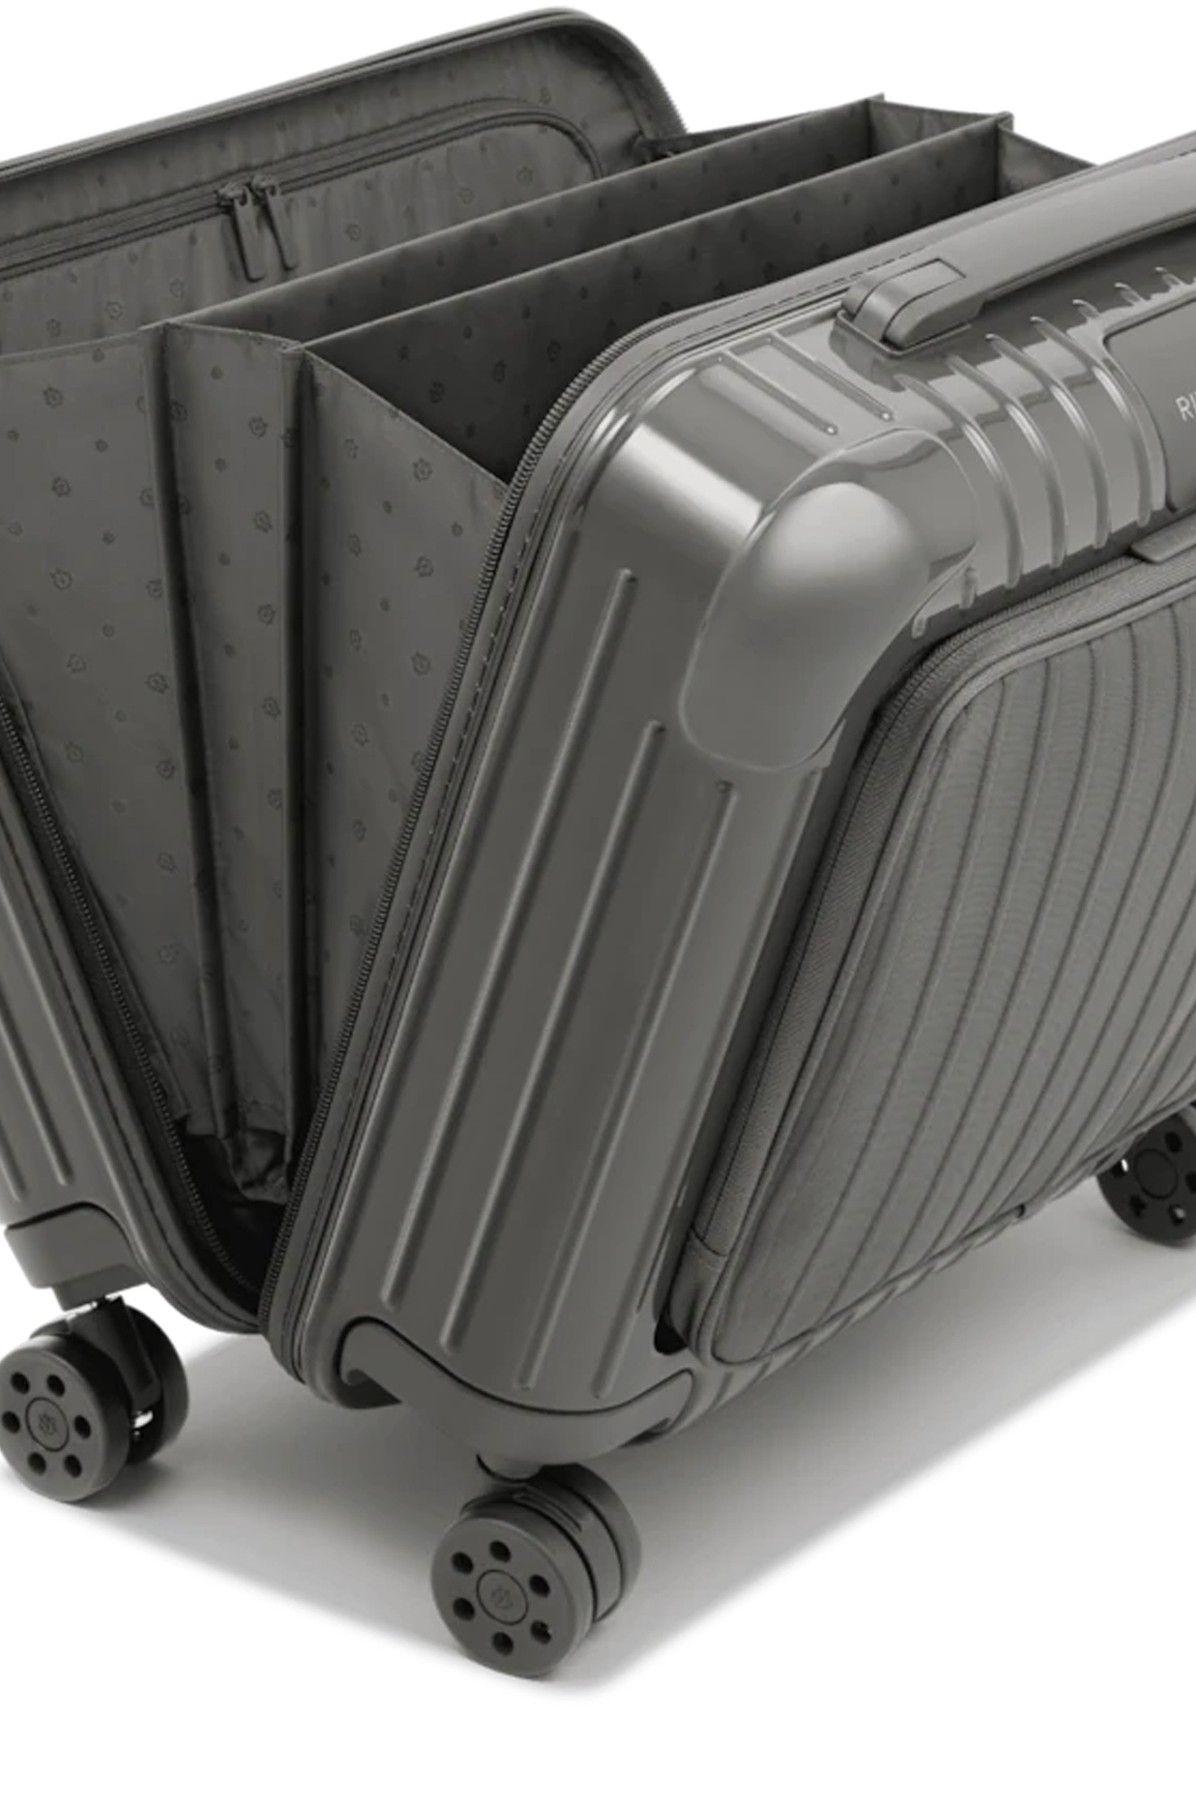 Rimowa Essential Sleeve Cabin Spinner, Small